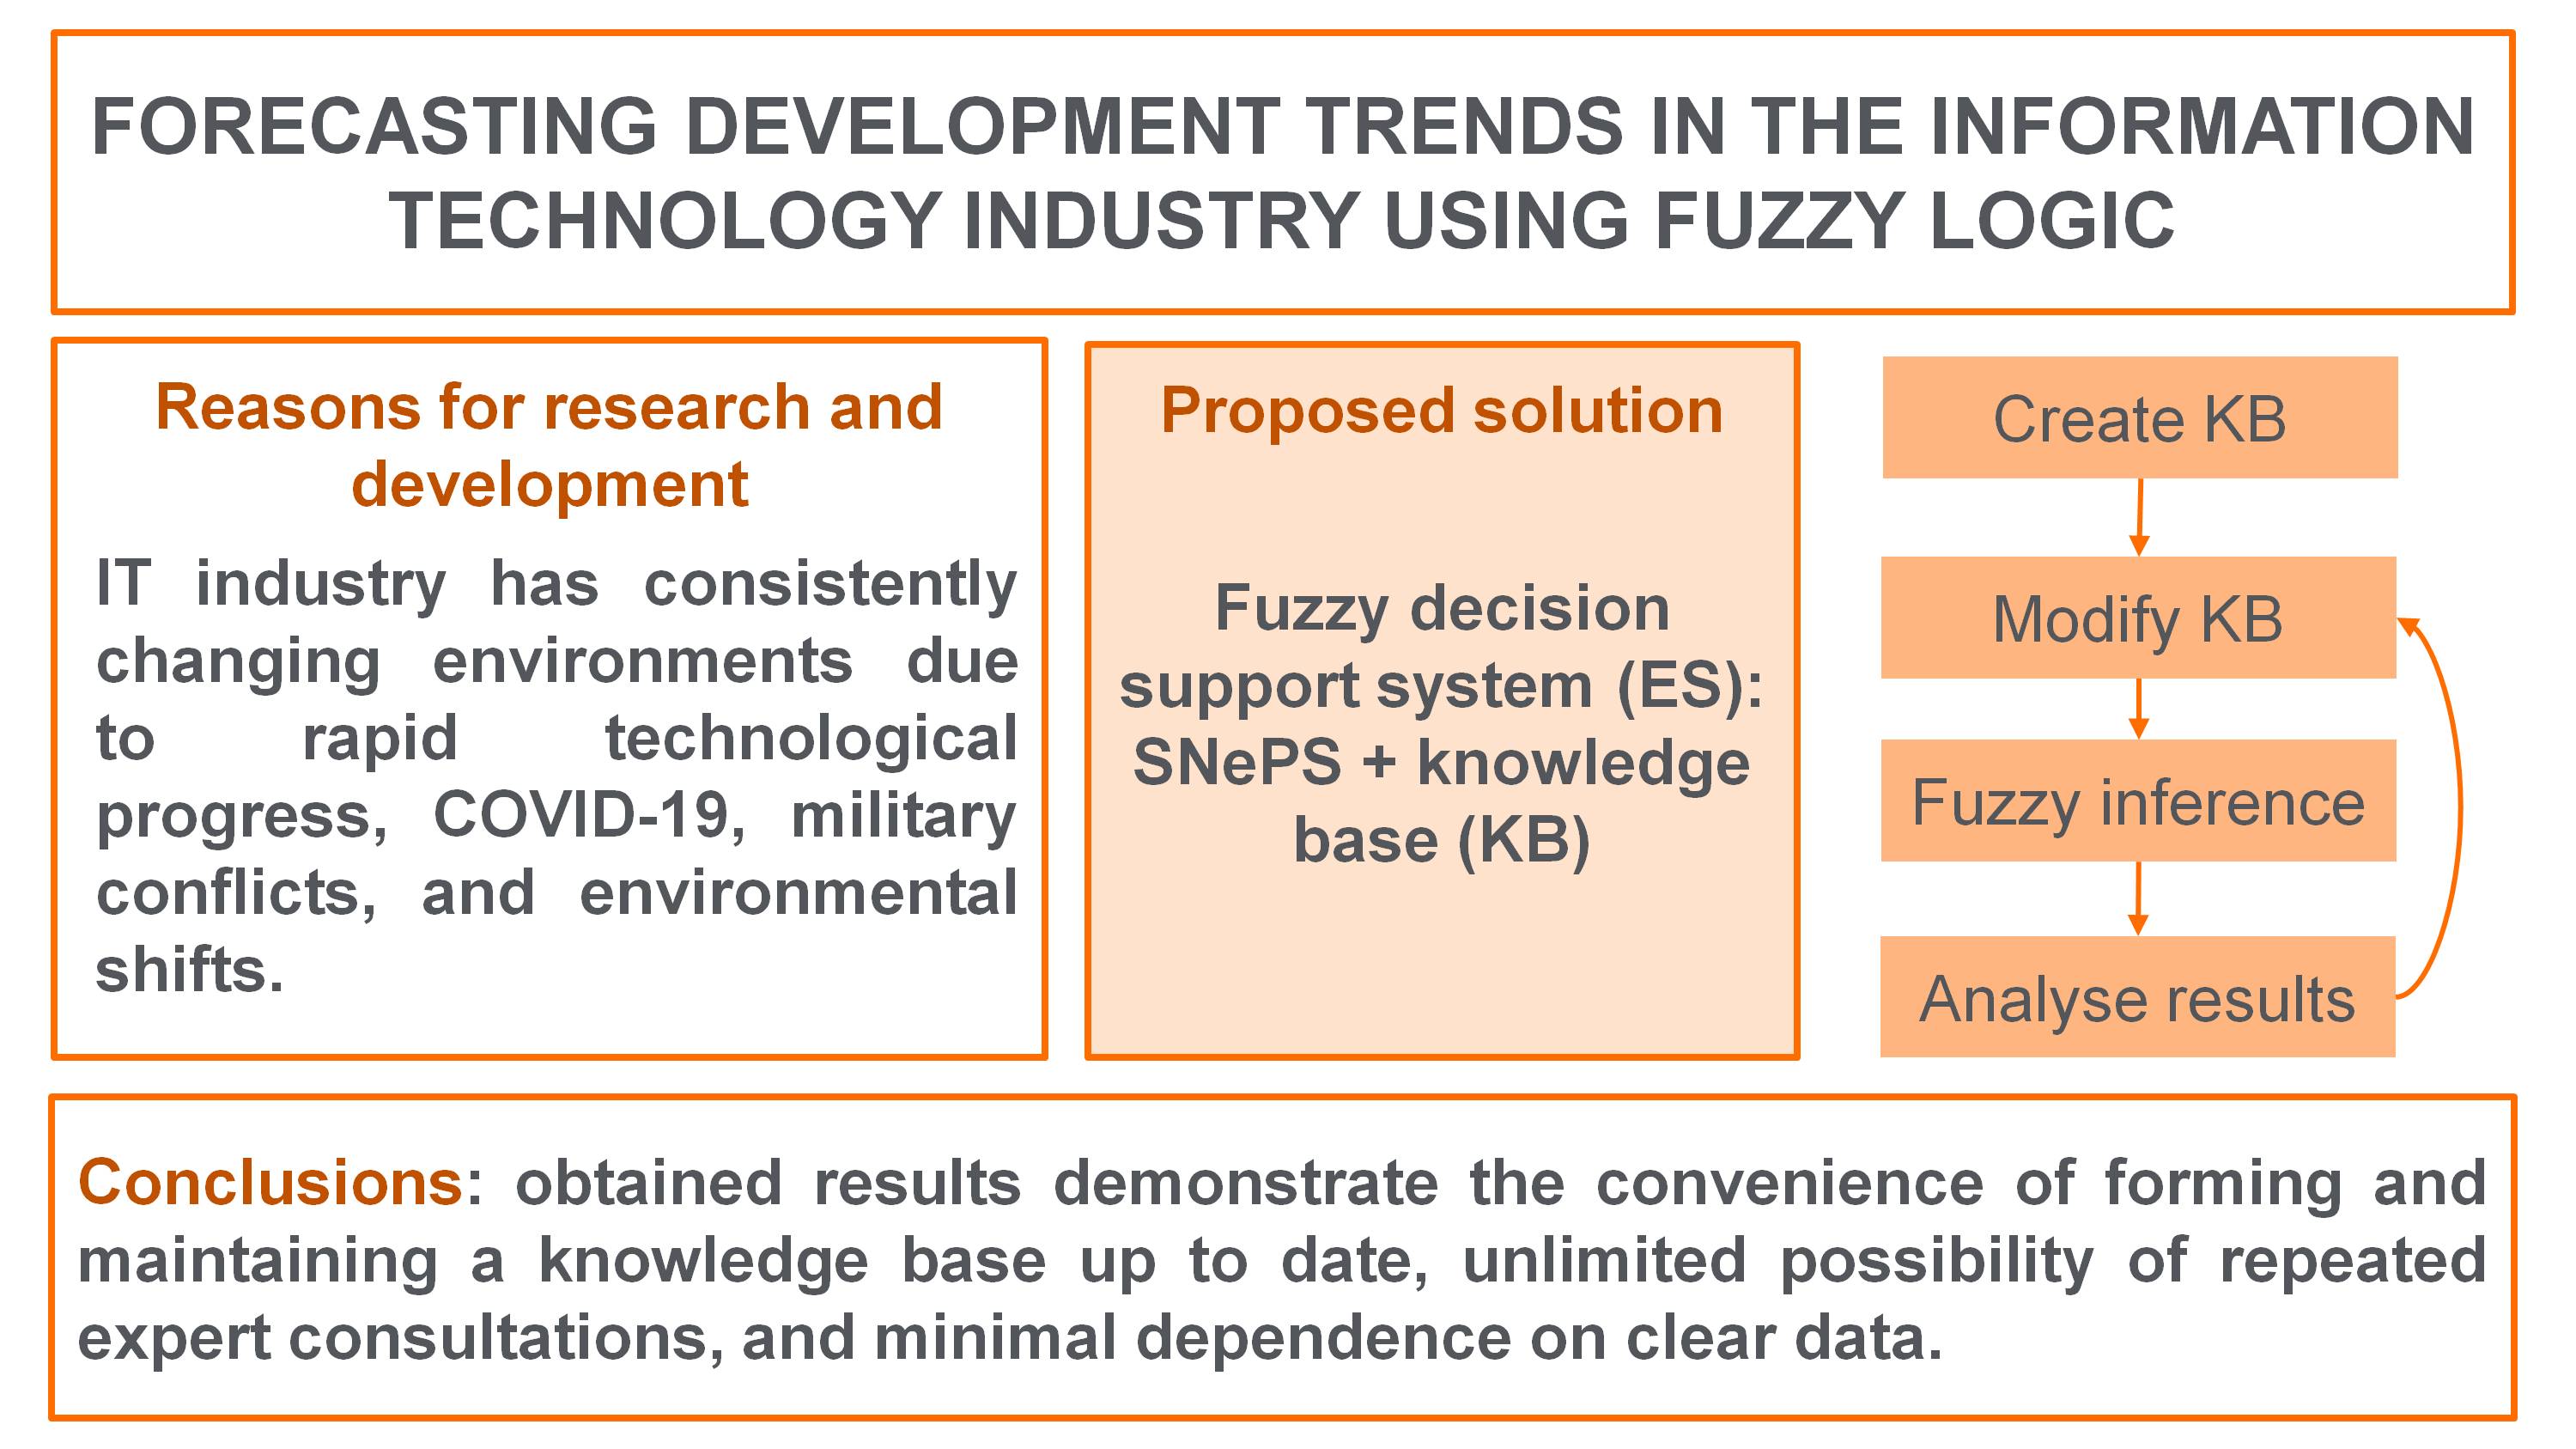 Forecasting development trends in the information technology industry using fuzzy logic